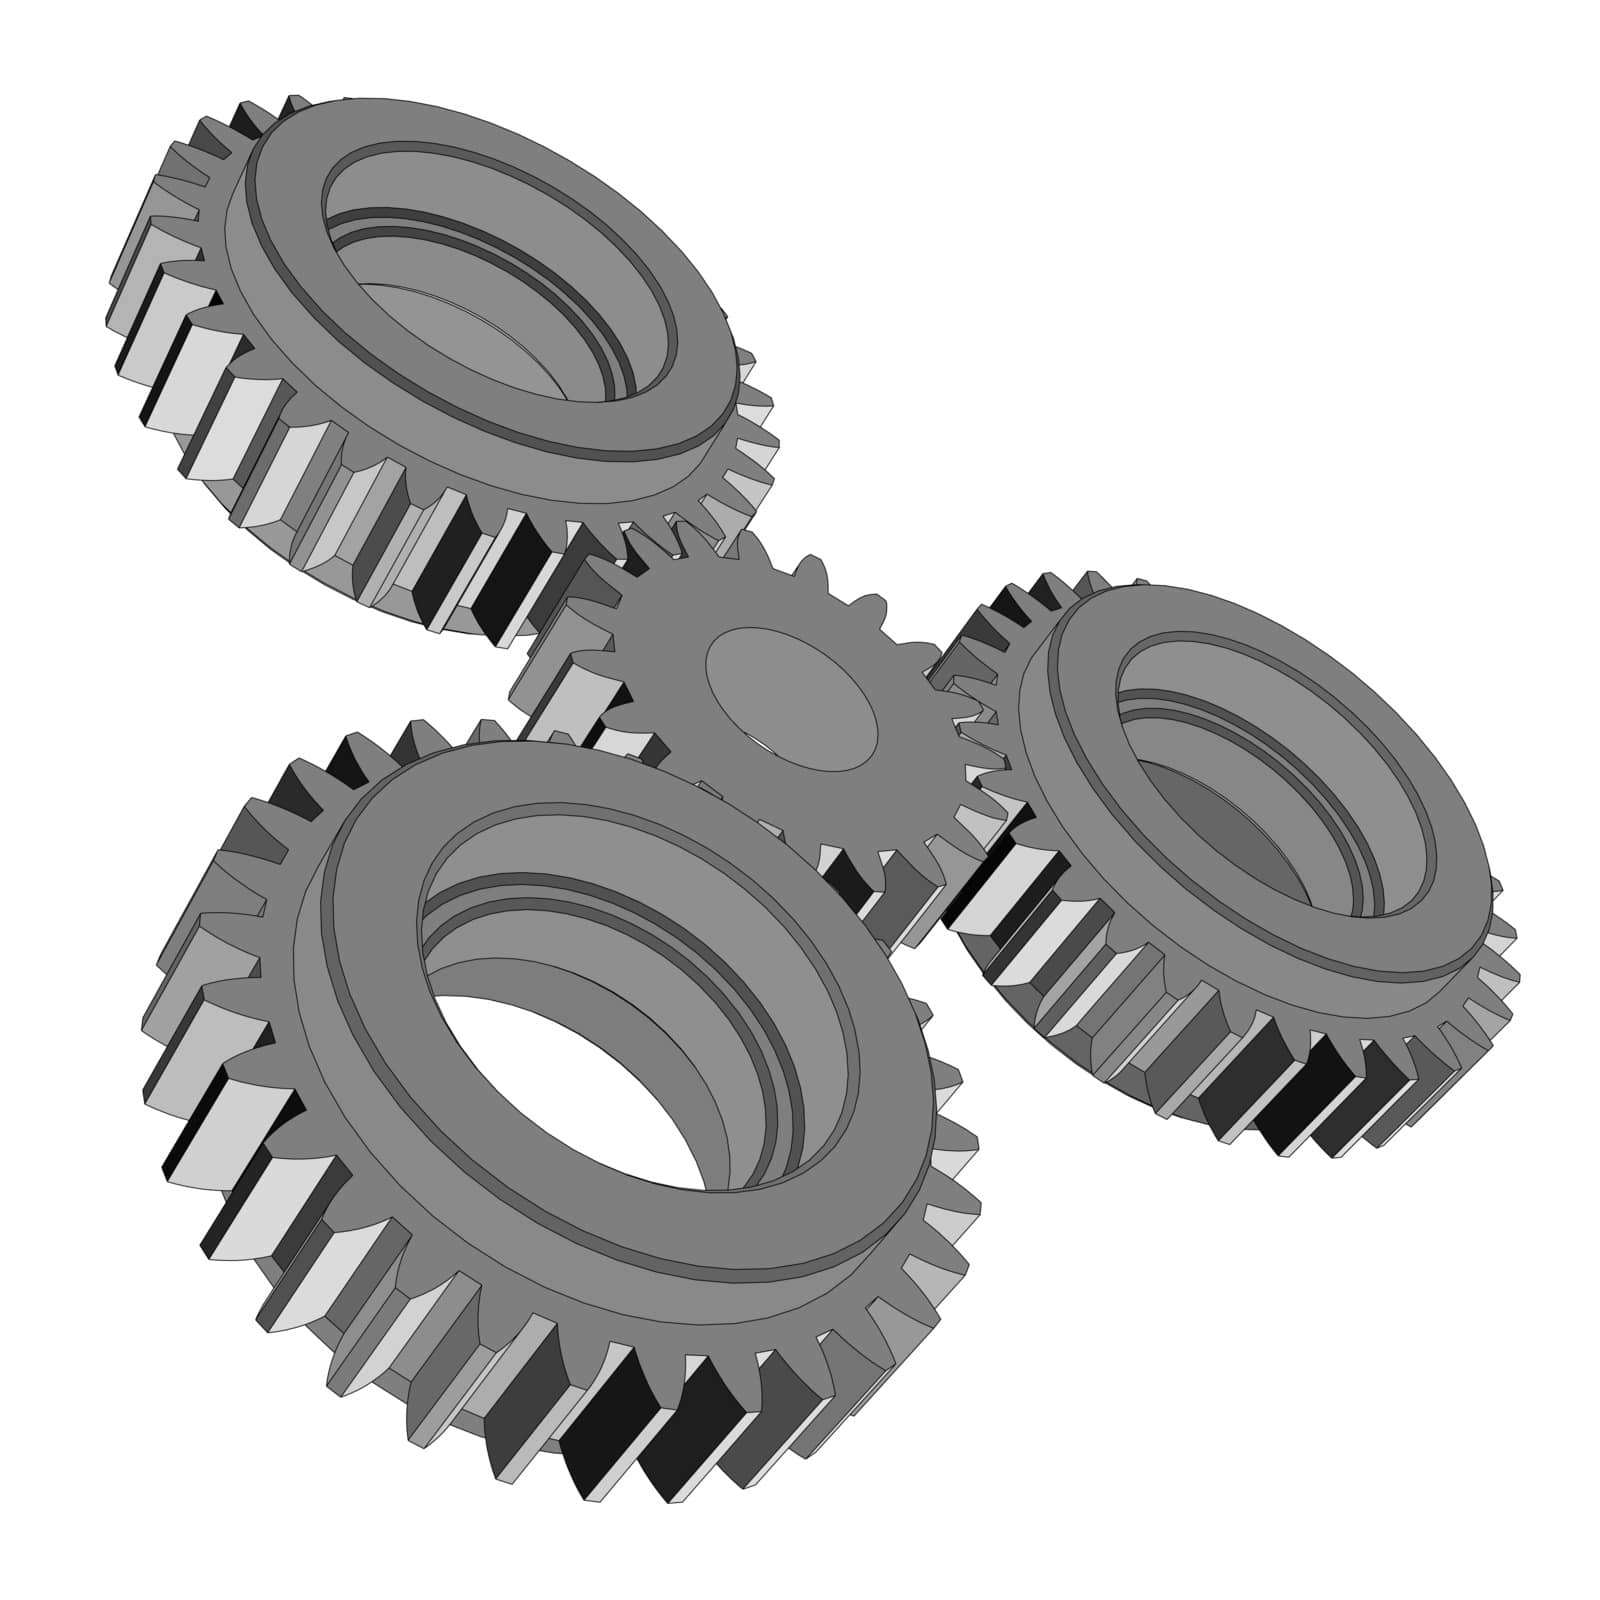 Three-dimensional toothed wheels. Vector rendering of 3d